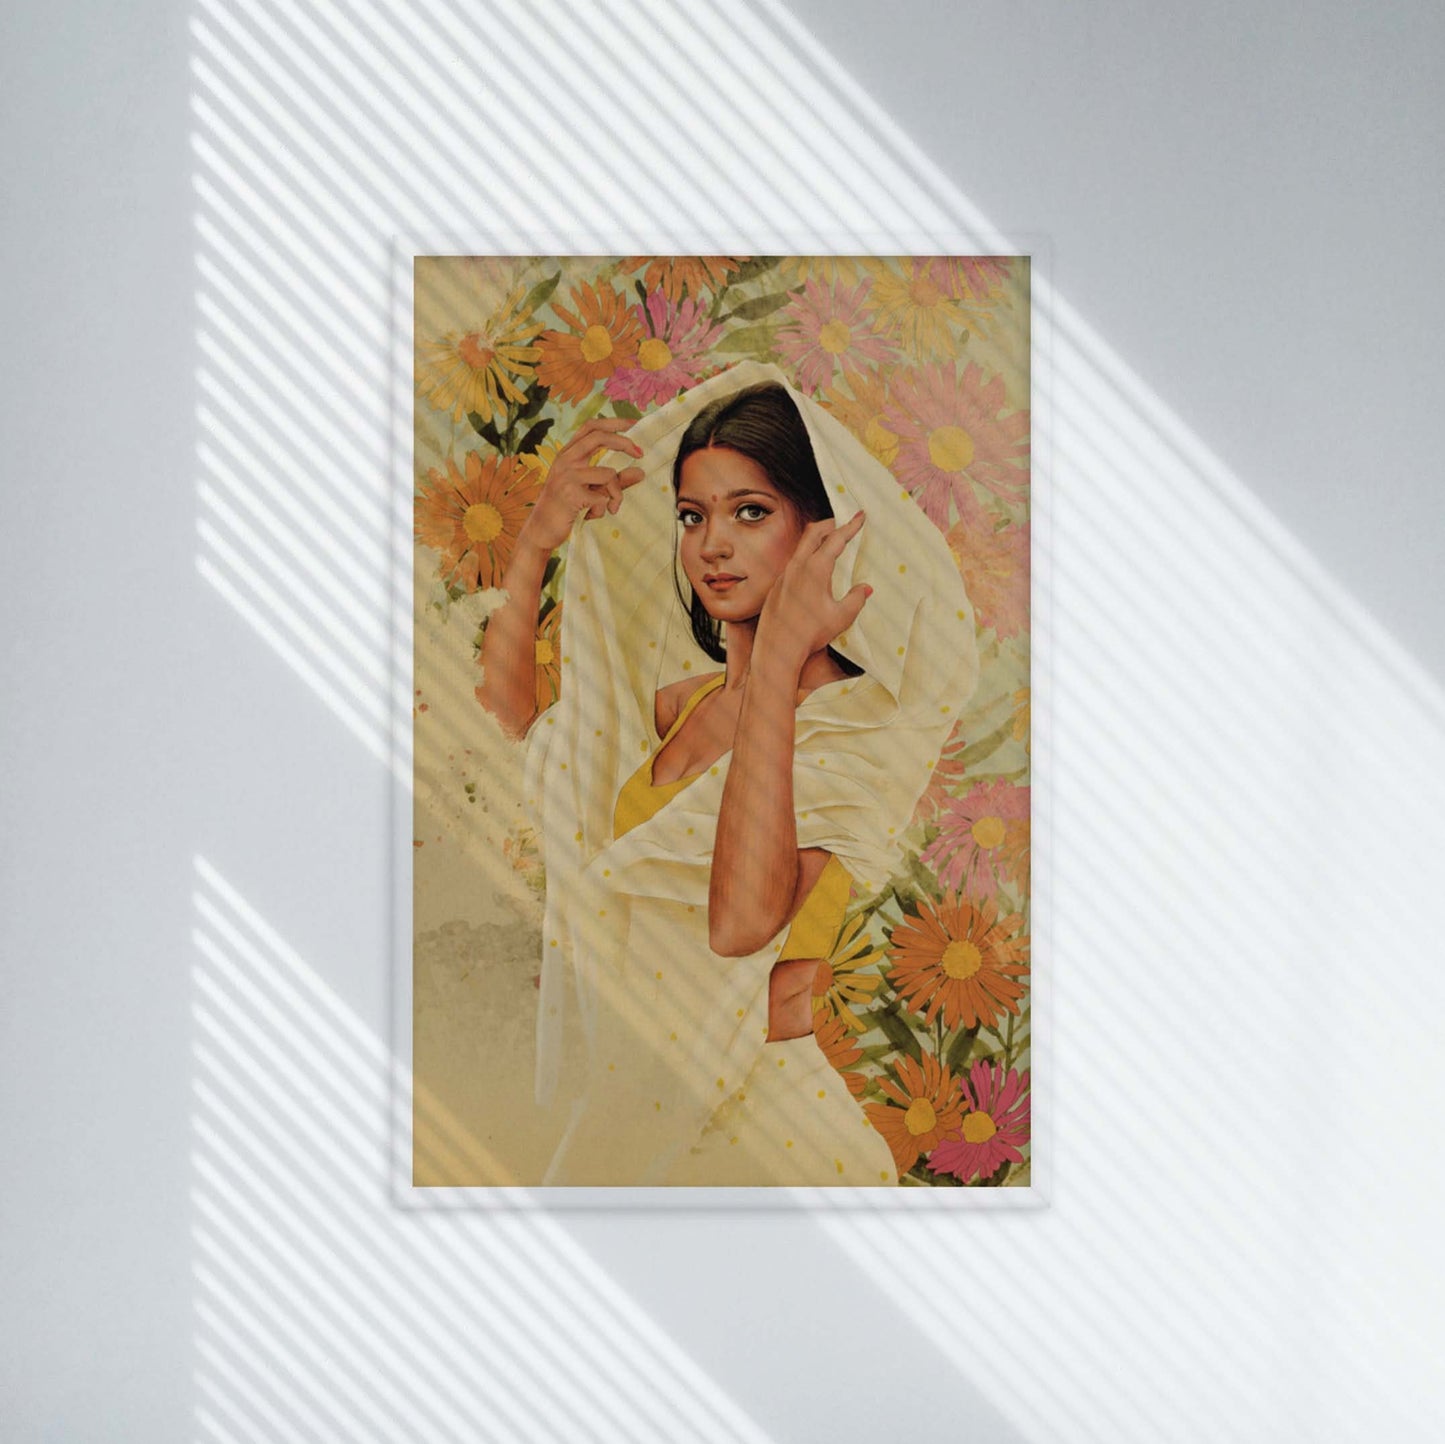 Woman in beige polka dots saree with yellow blouse in pink, orange, yellow  floral background white framed wall art.